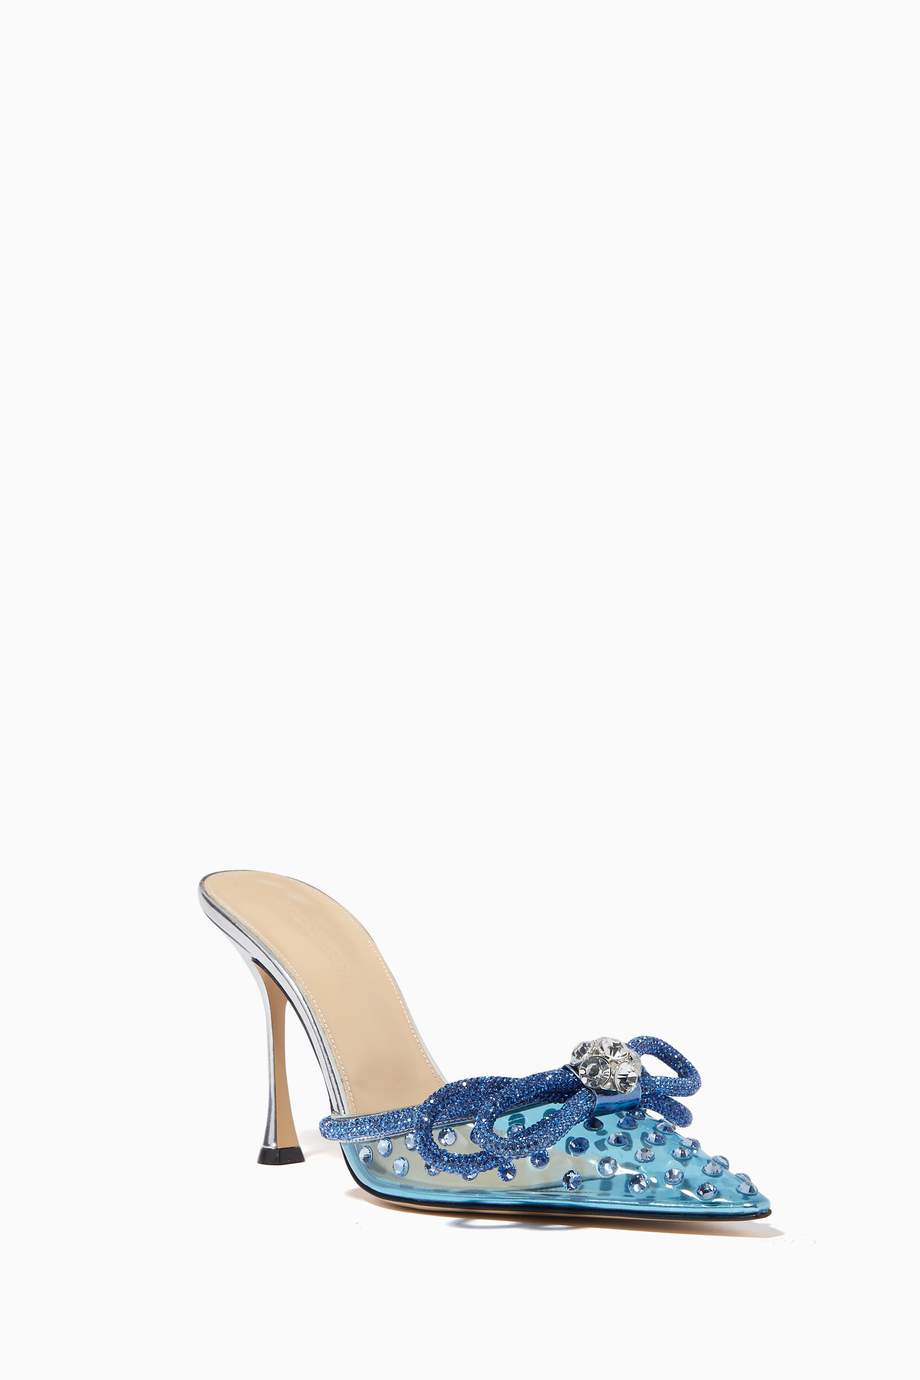 Shop Mach&Mach Blue Double Crystal Bow Pumps in Crystalized PVC for ...